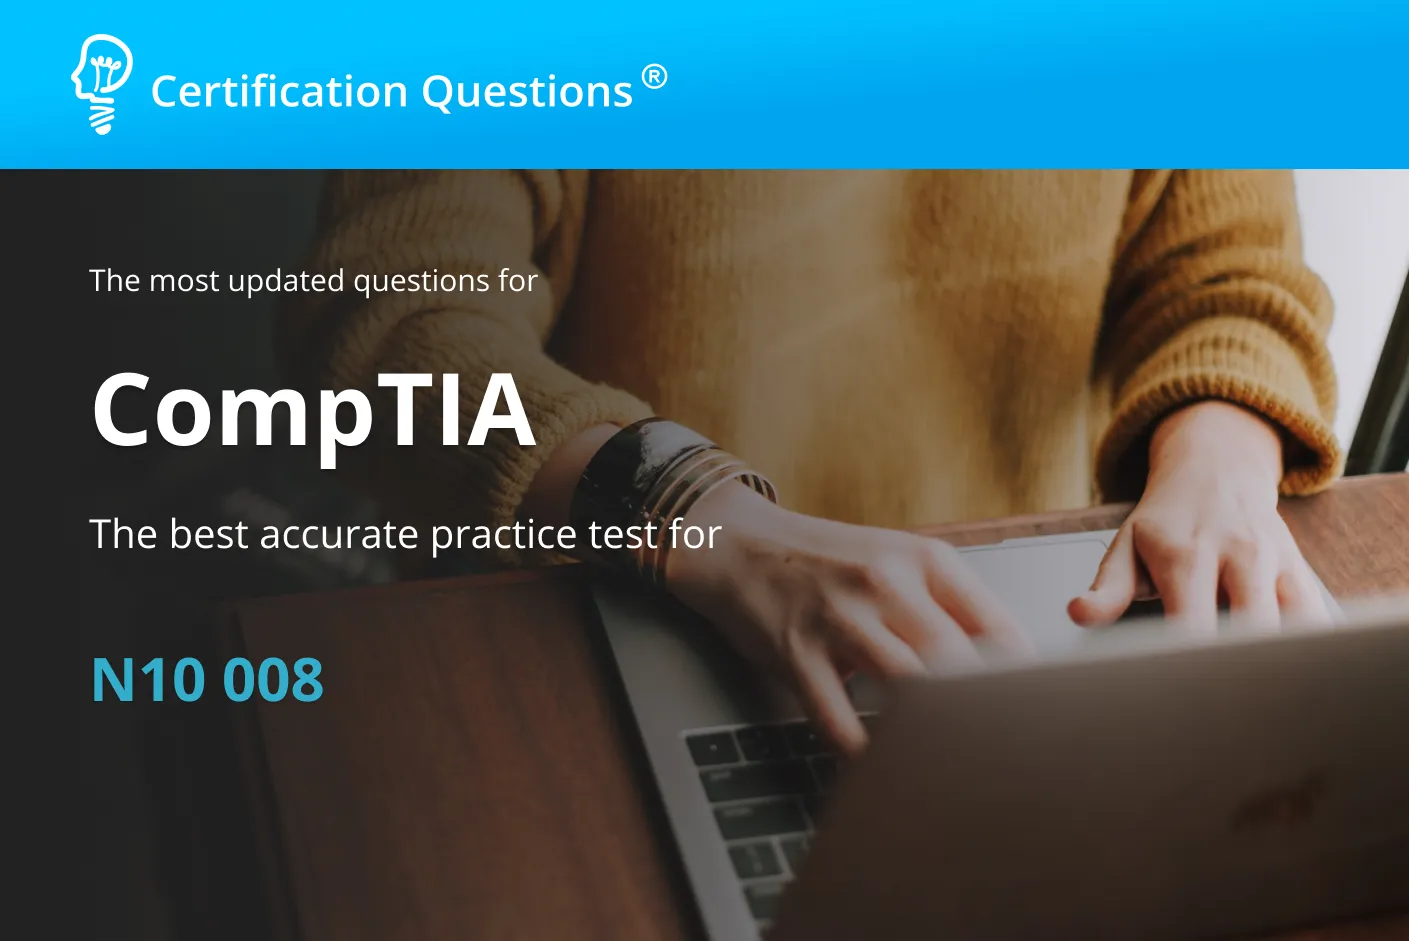 This image is related to the study guide of the Comptia Network+ n10-008 practice test